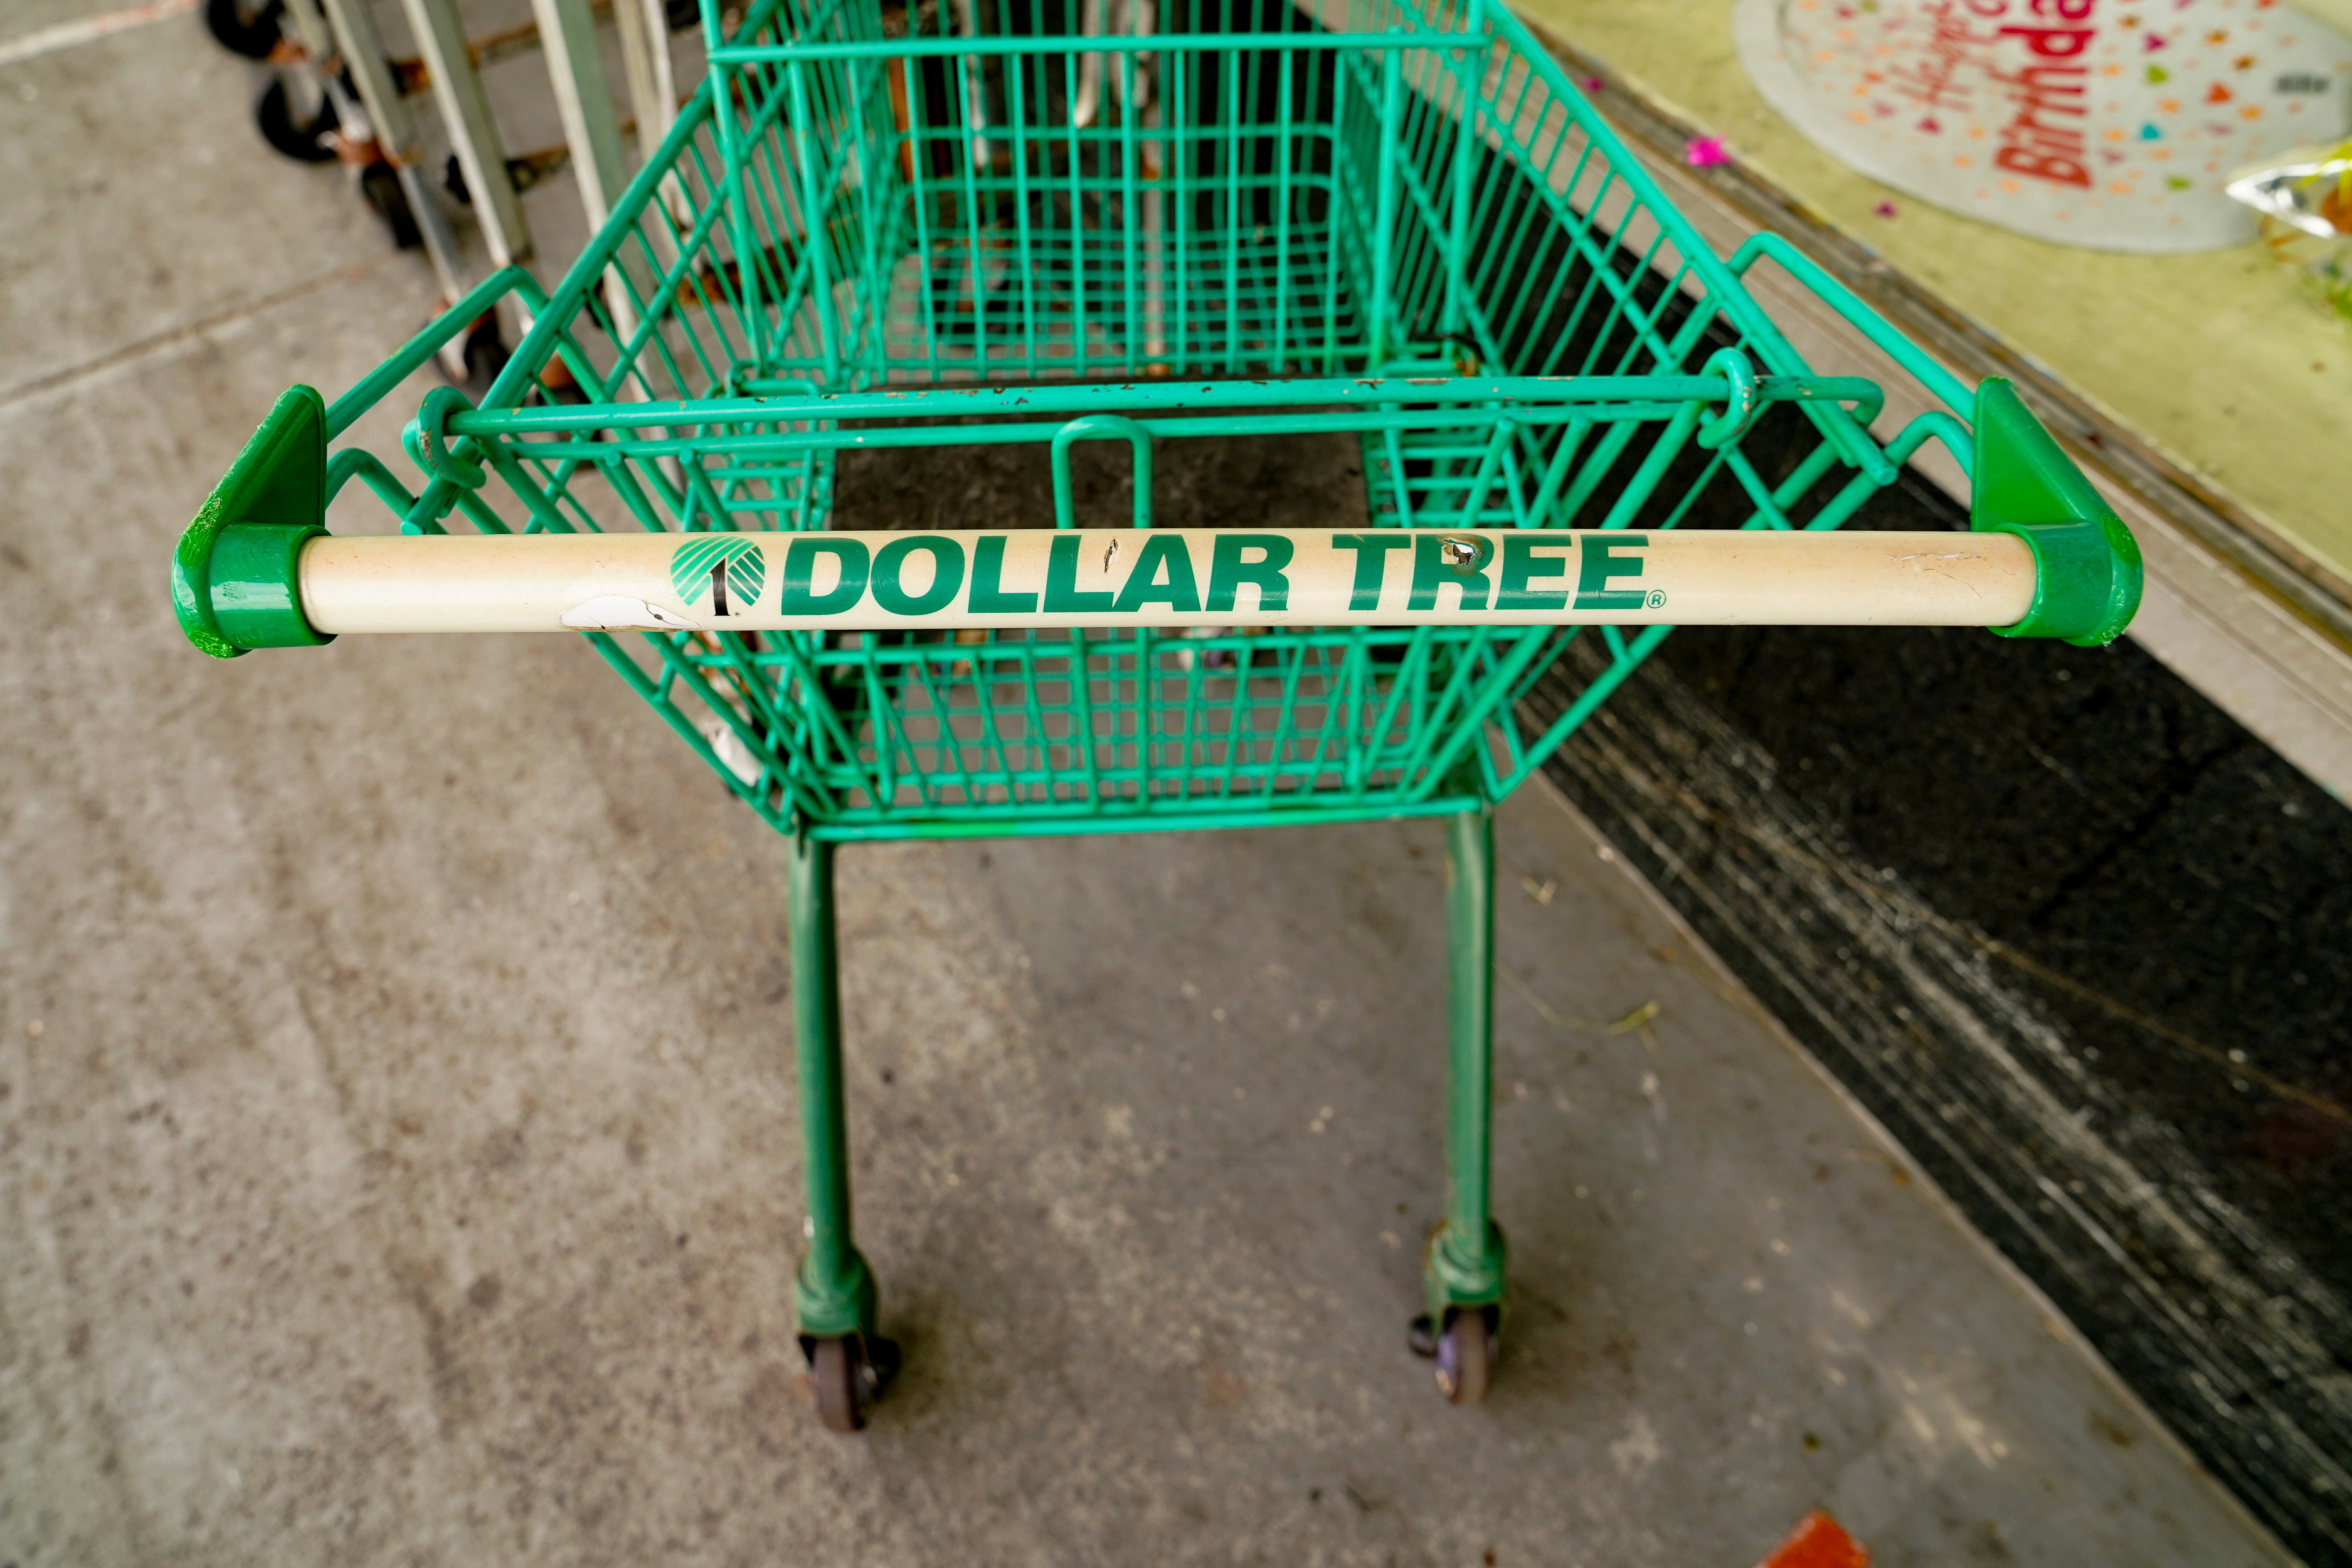 A shopping cart is seen outside a Dollar Tree store in Mount Rainier, Maryland